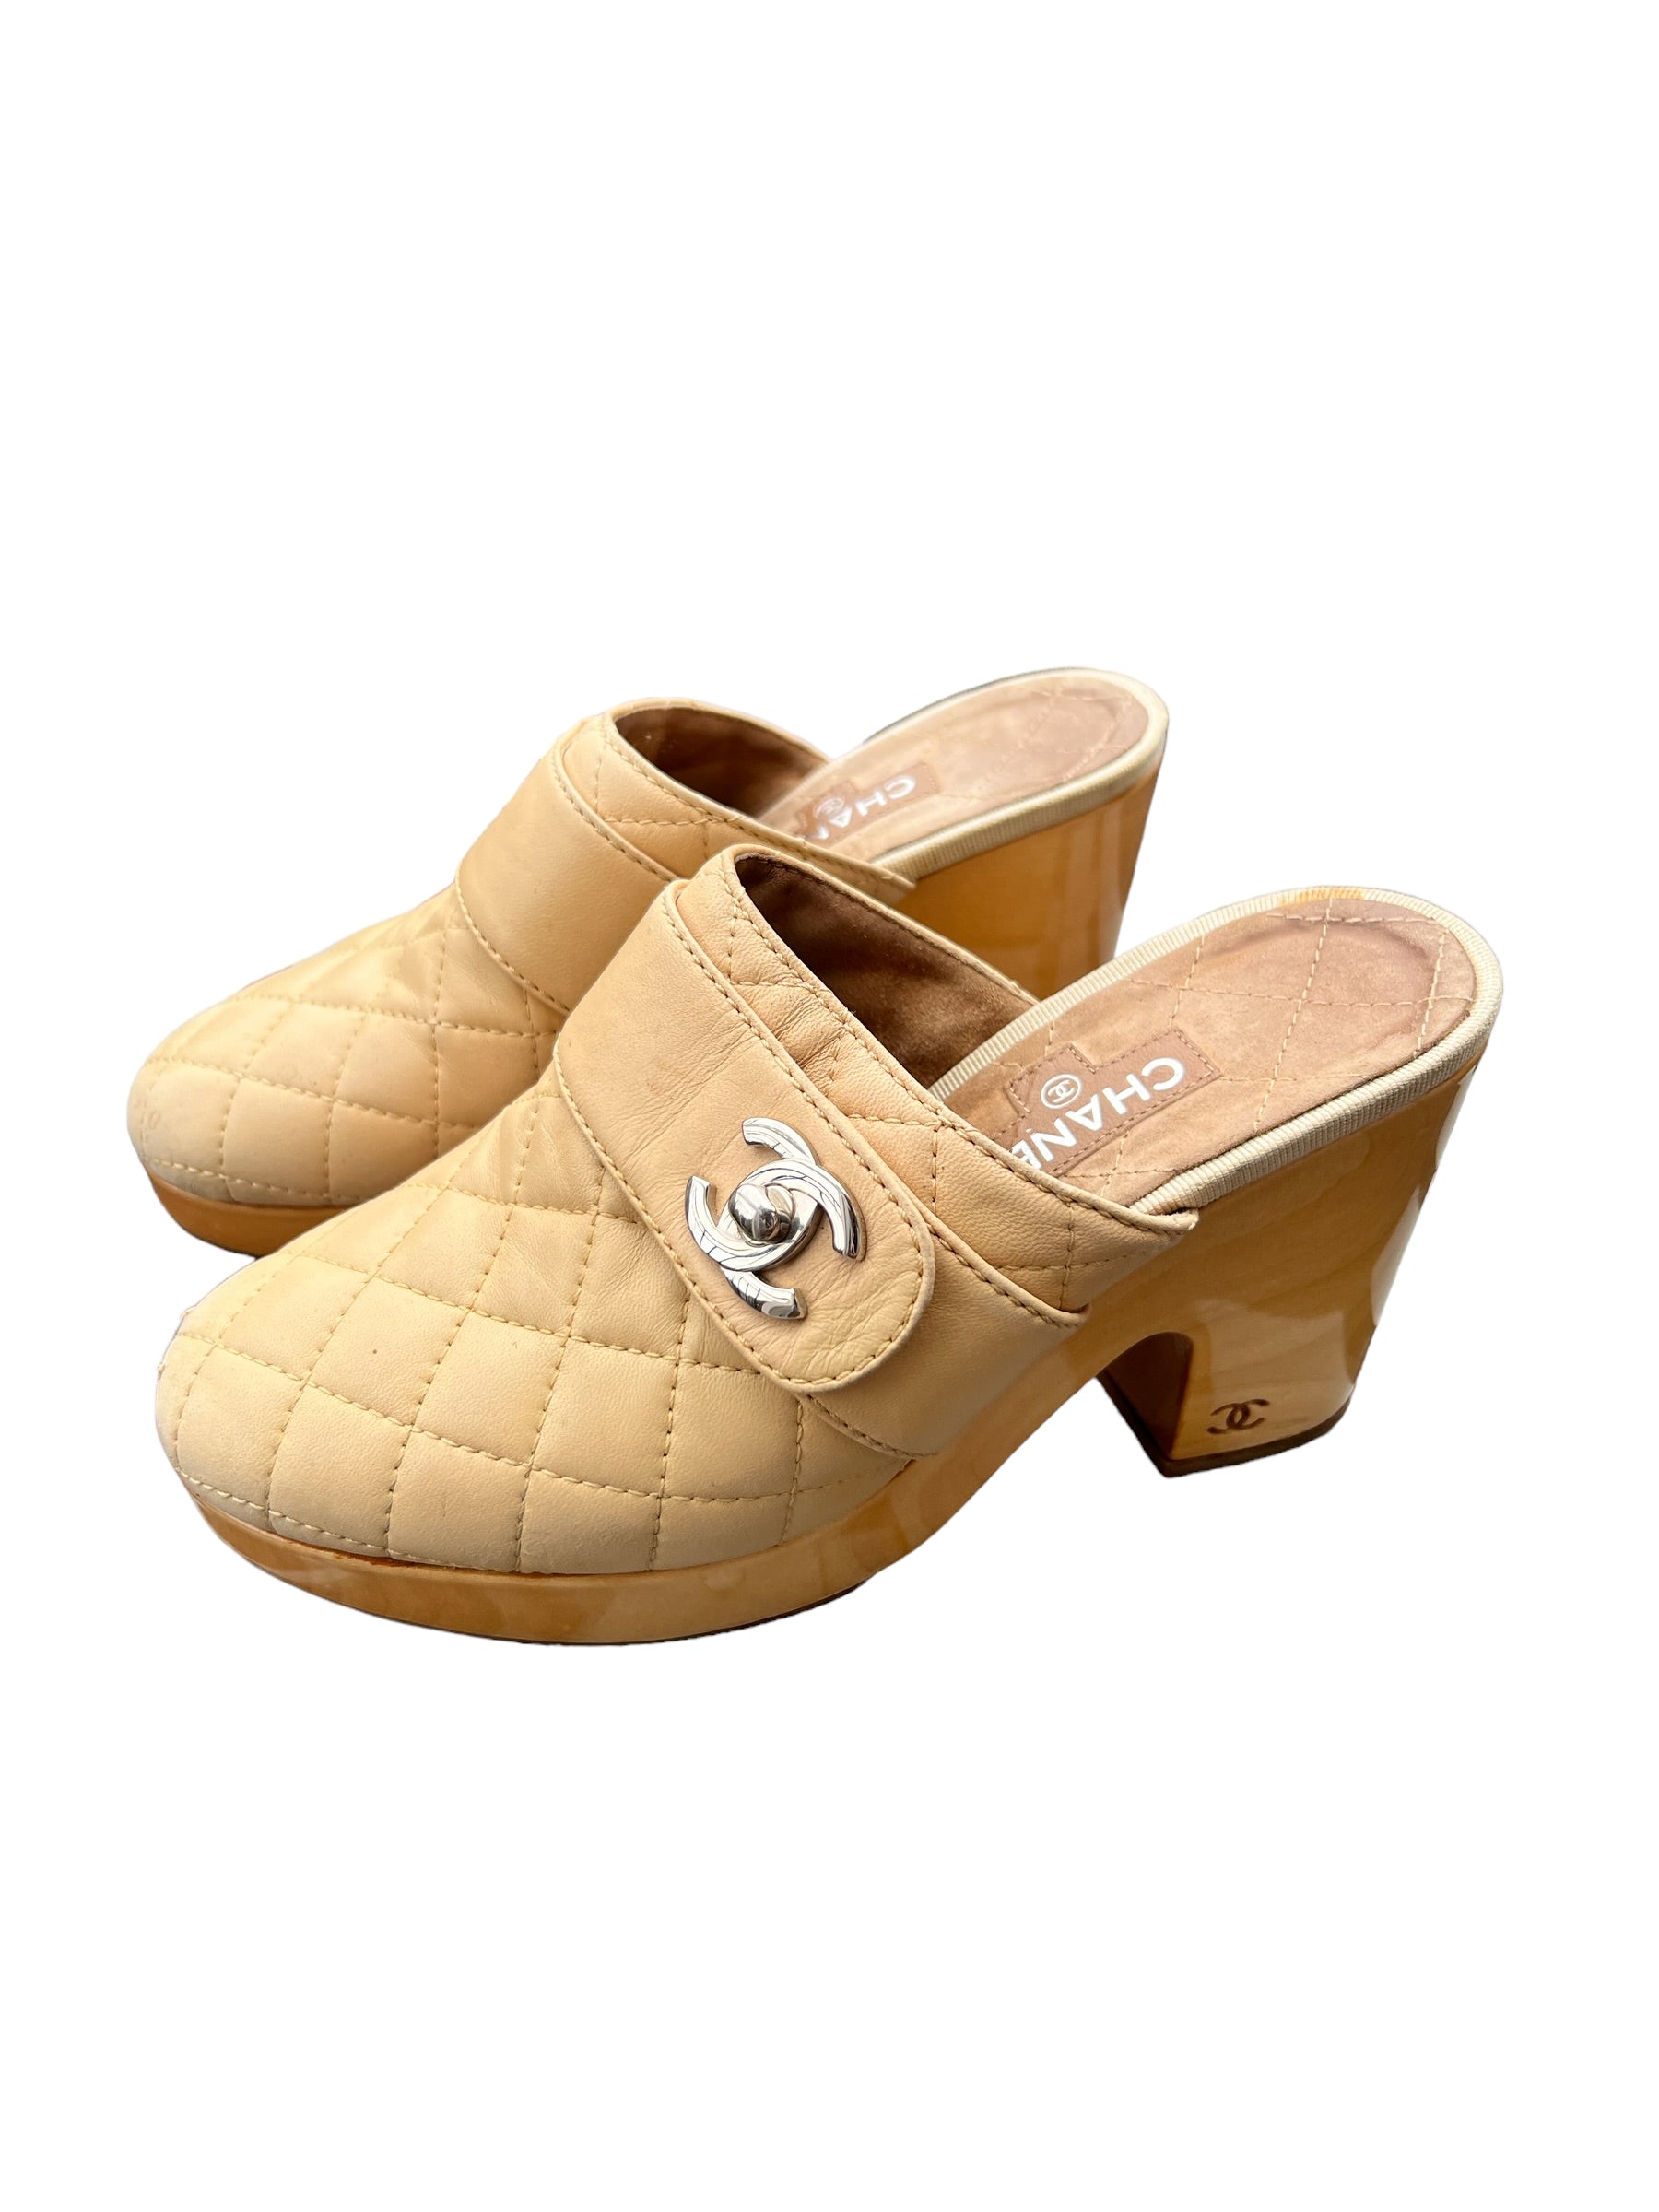 Sold at Auction: Pair of Chanel Clogs